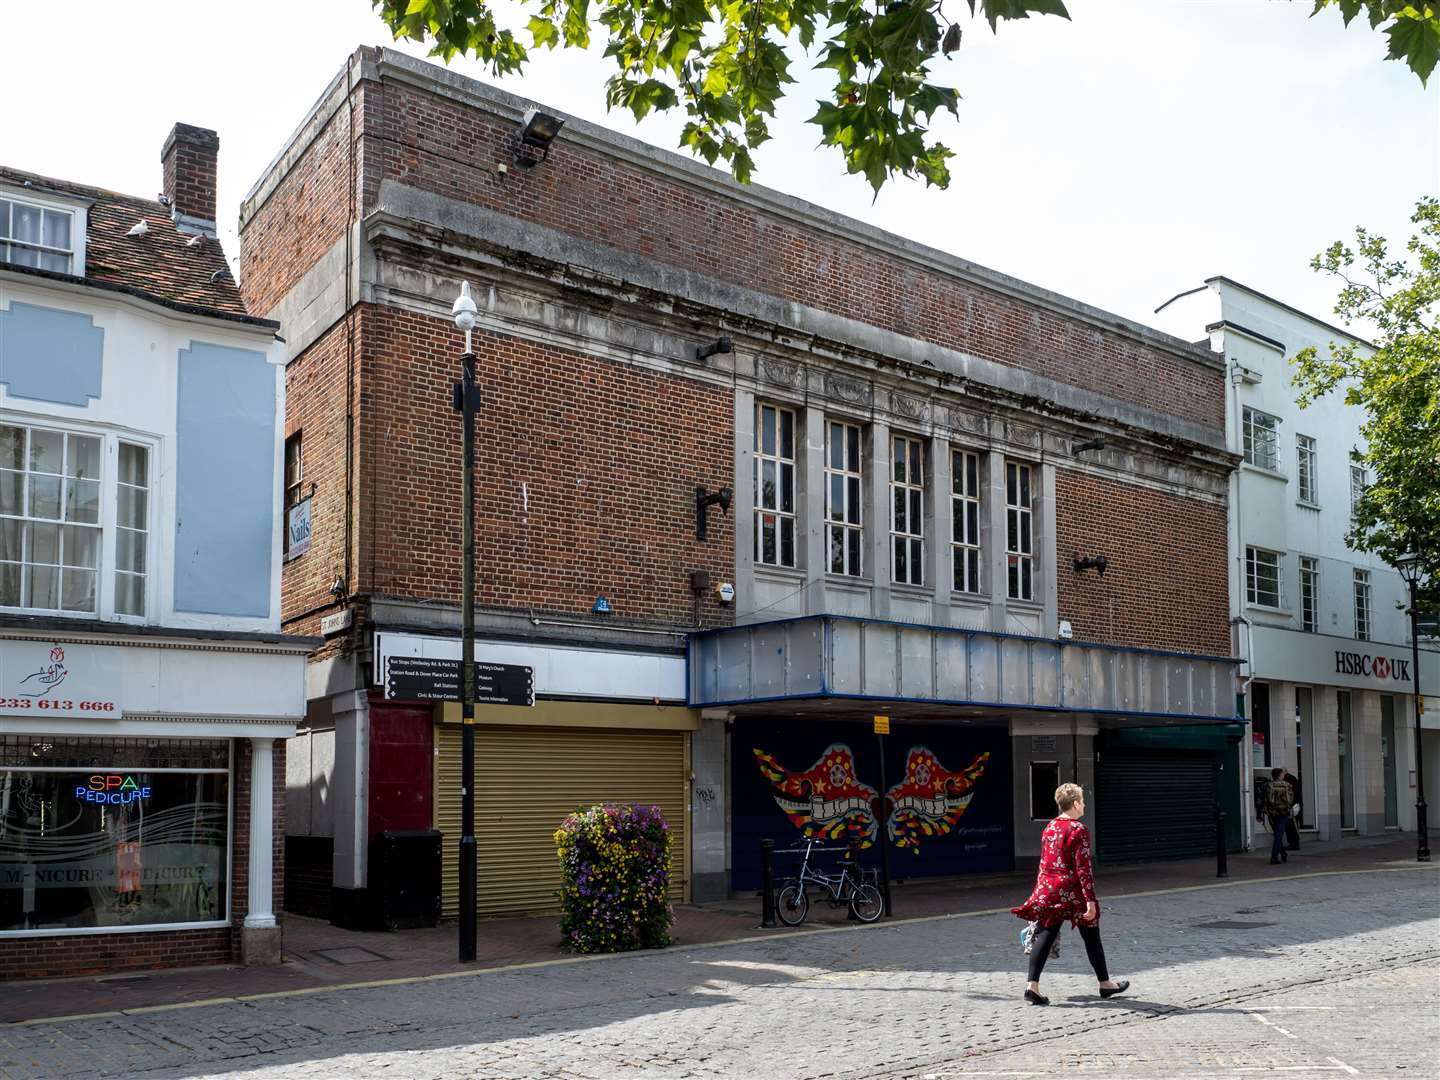 The frontage of the former Mecca Bingo in Ashford is set to be retained under ABC's plans for the site. Picture: Ian Grundy